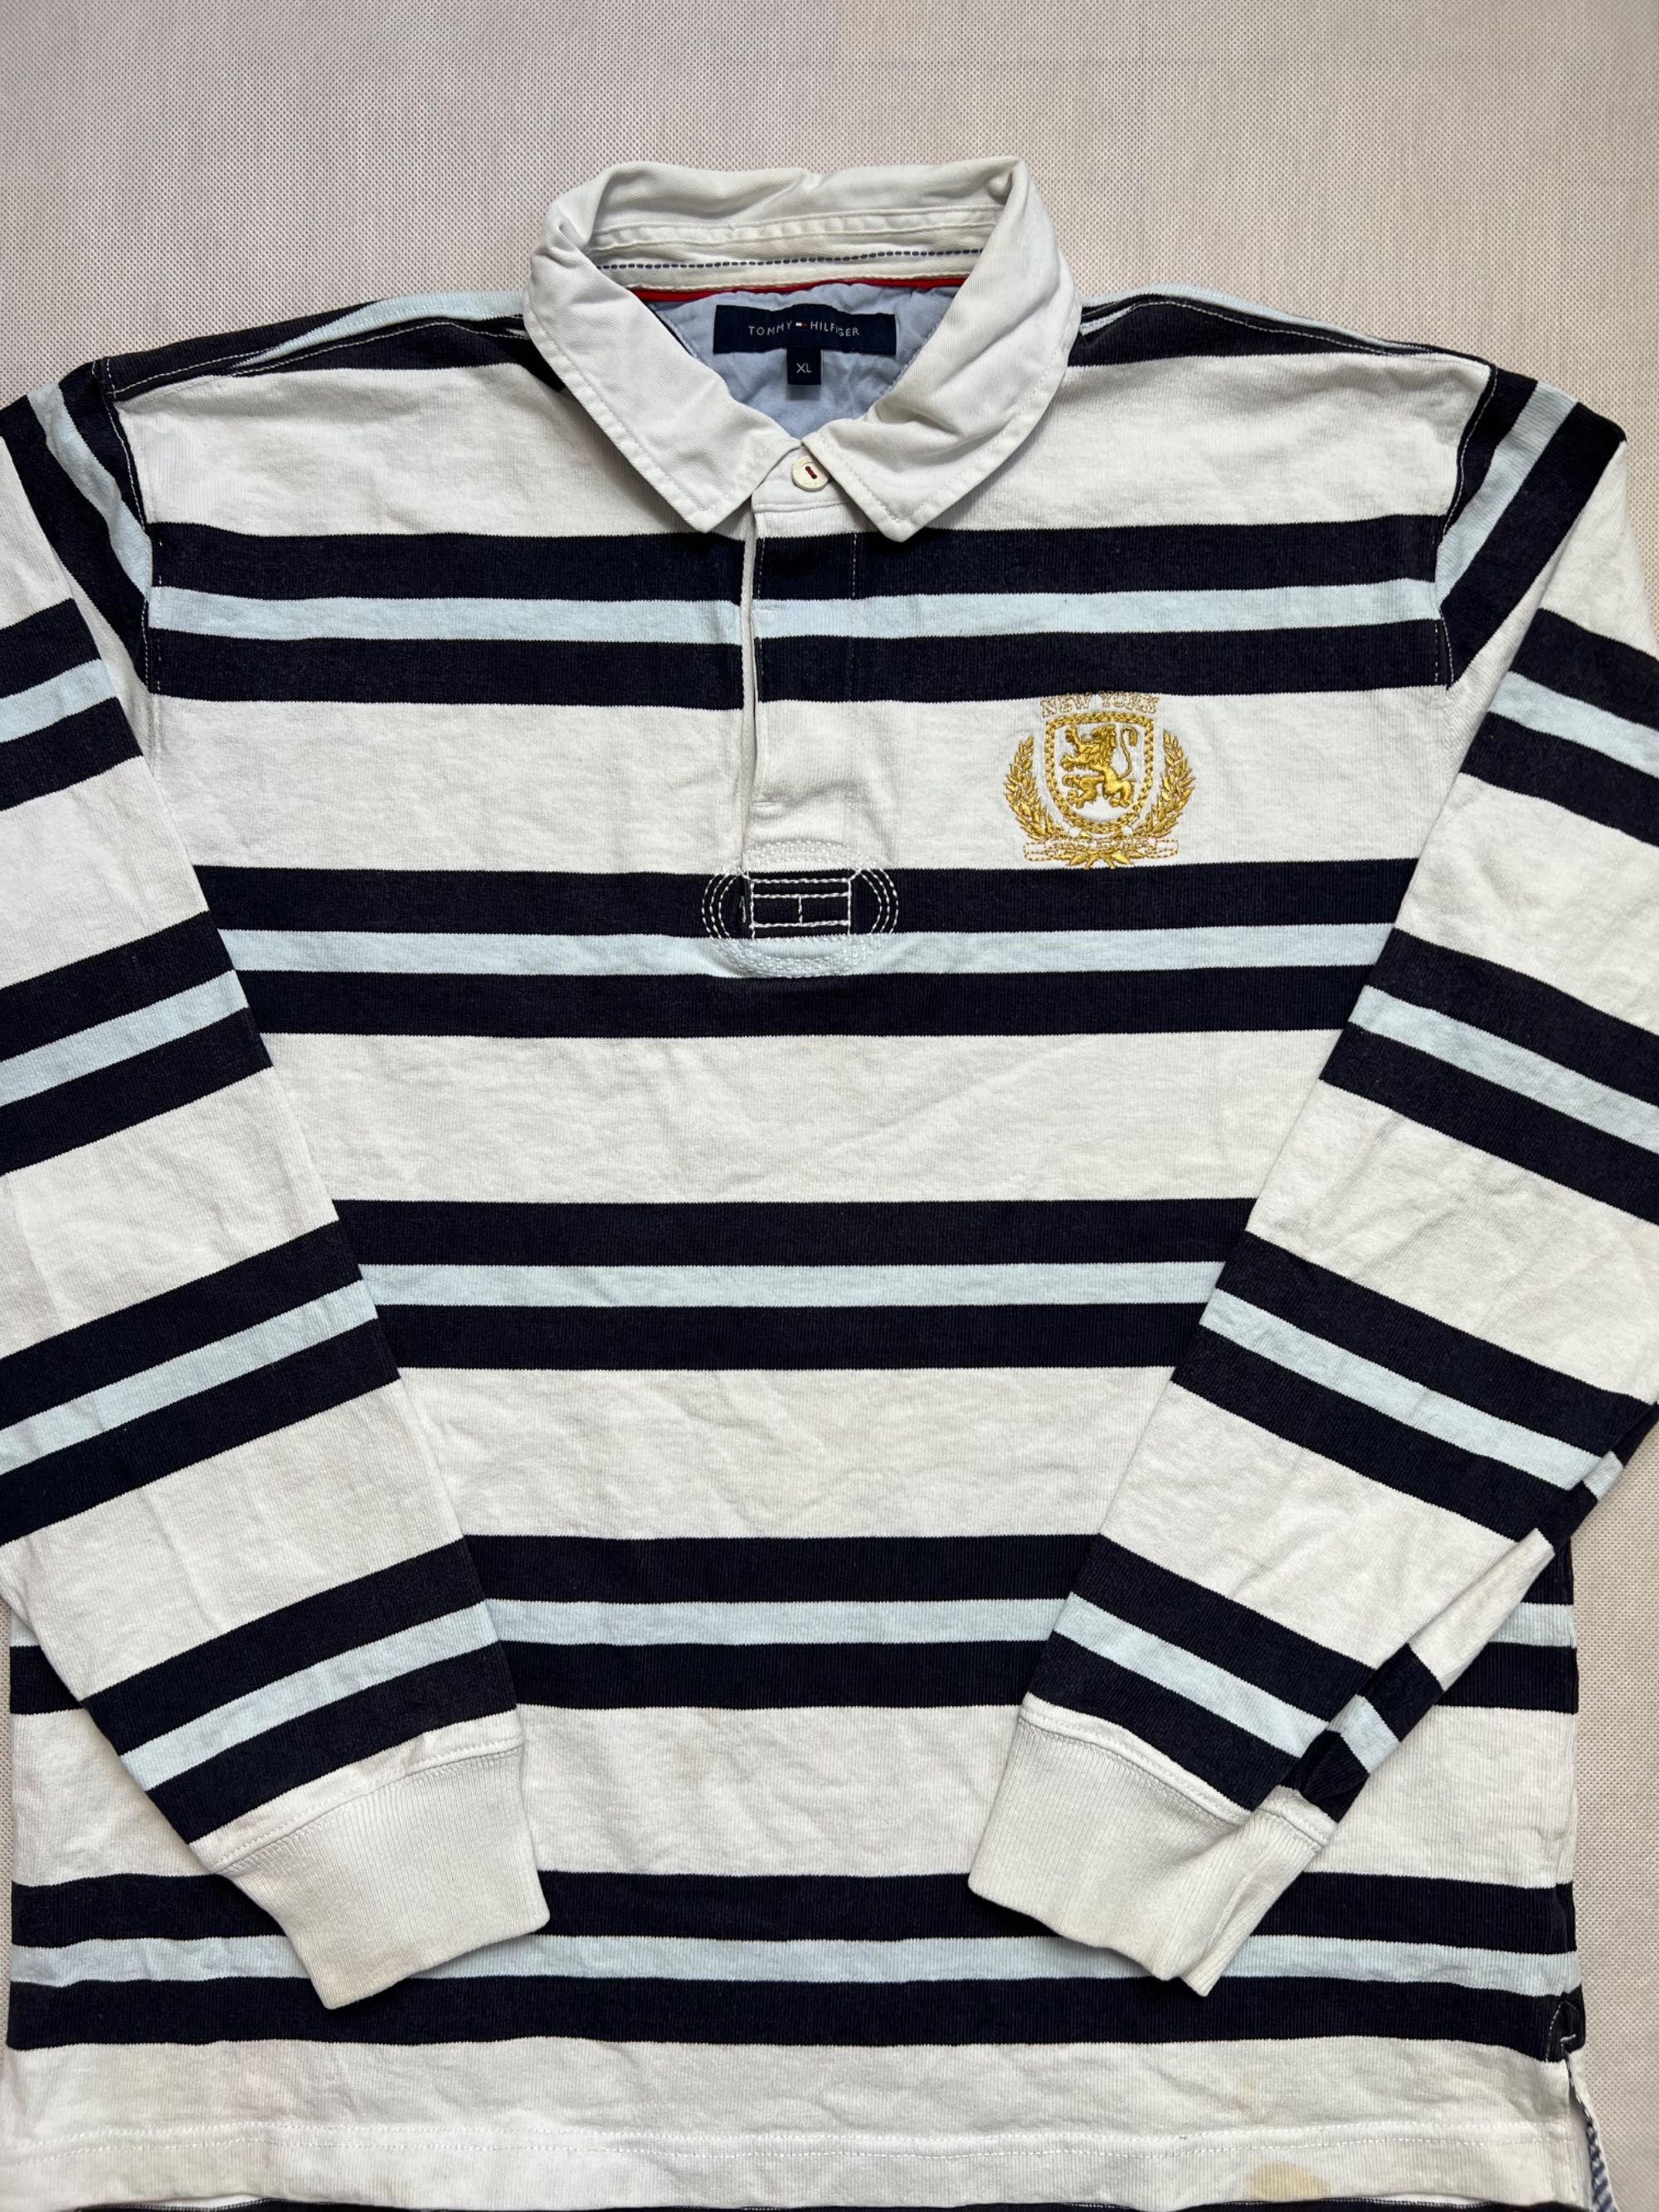 Longsleeve Tommy Hilfiger New York rugby